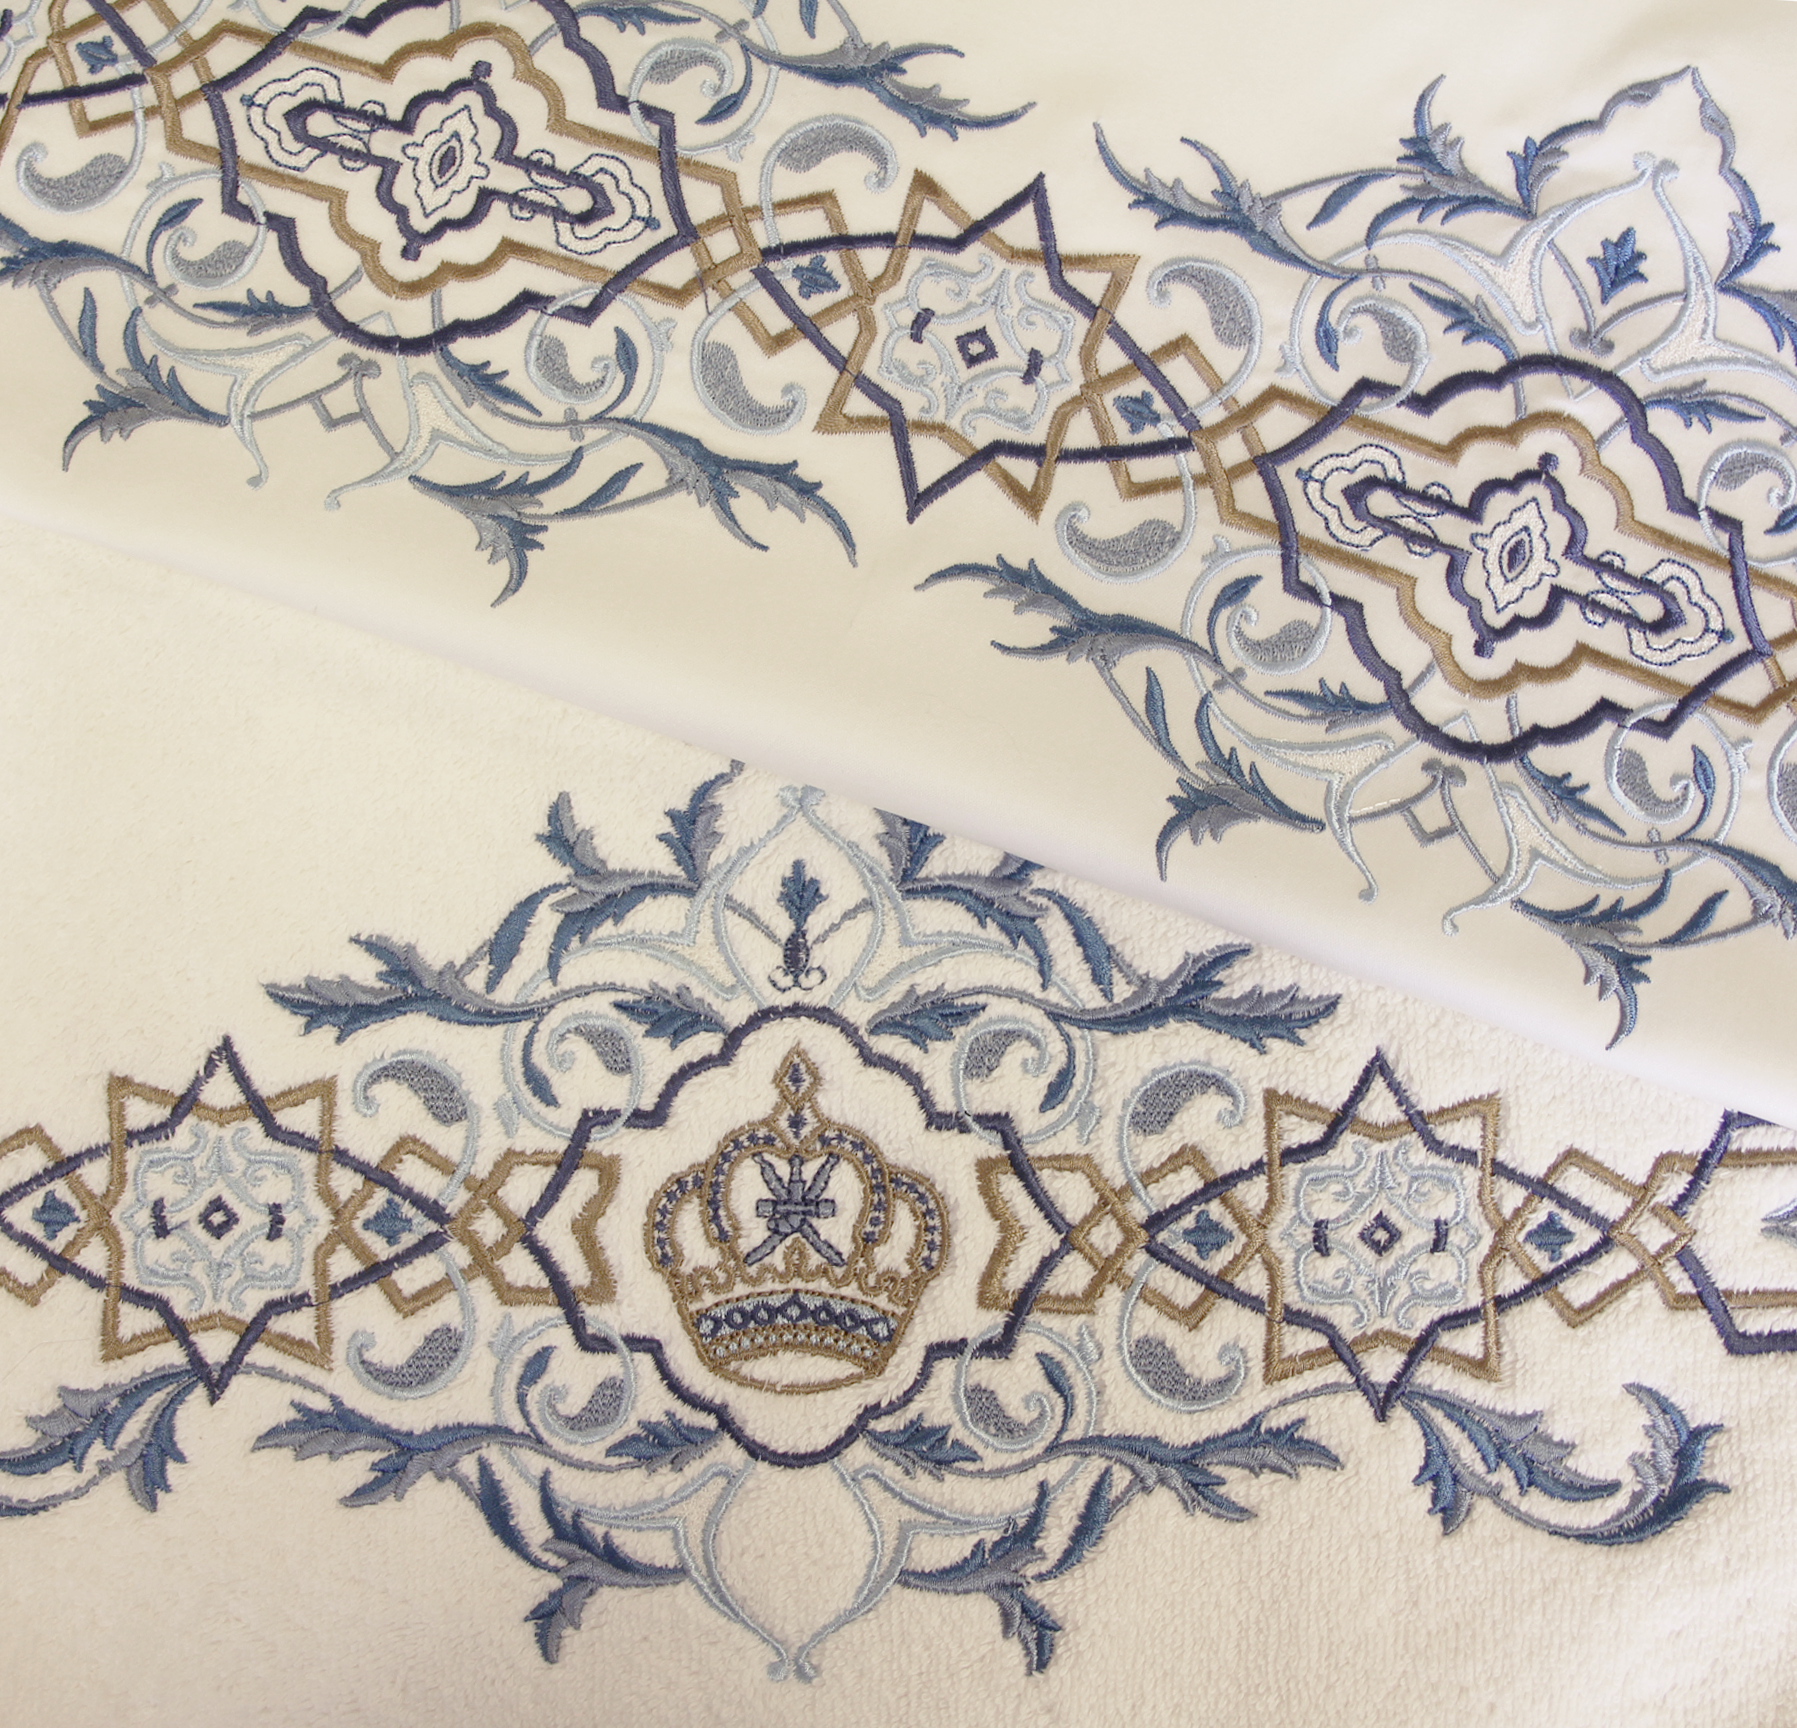 Middle east bespoke table linen_.png